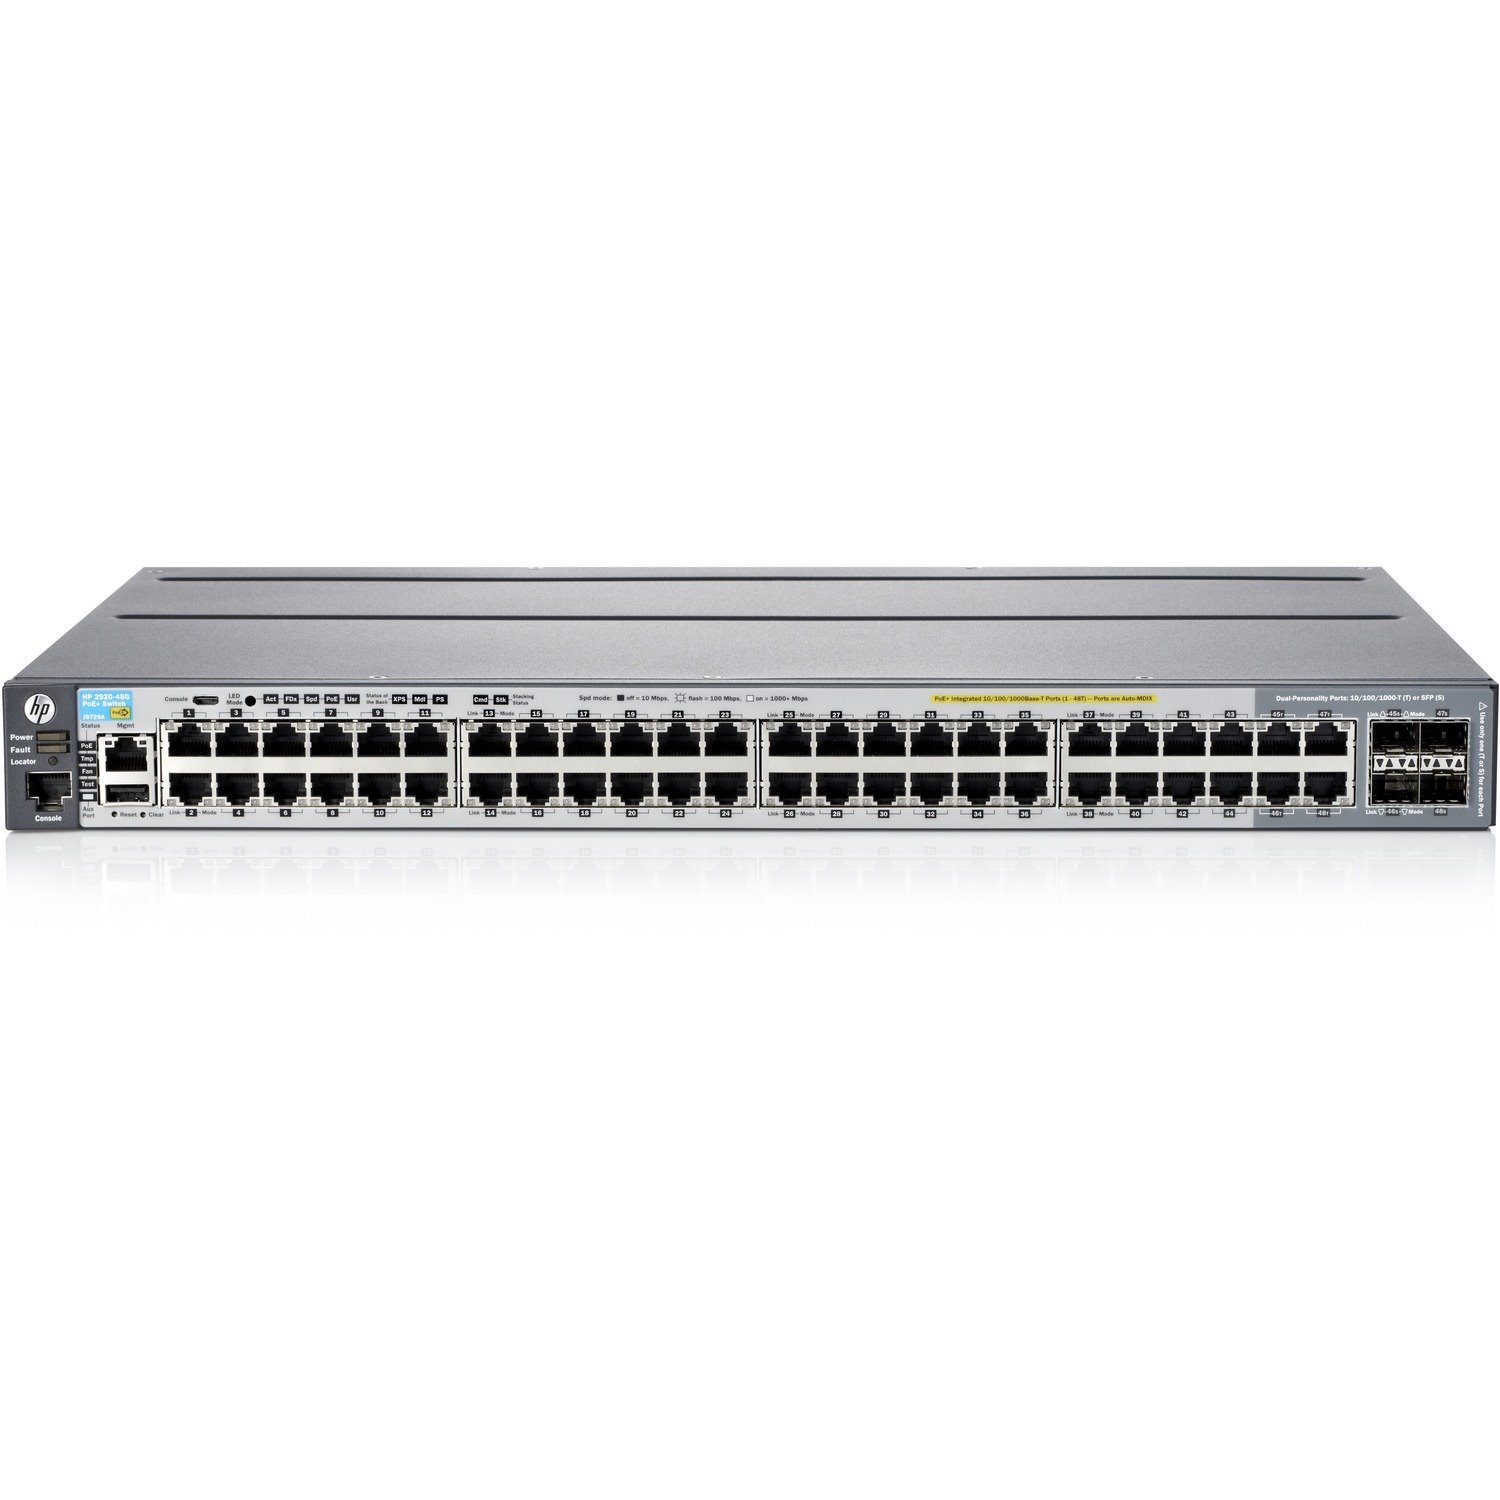 HPE-IMSourcing 2920-48G-POE+ Switch